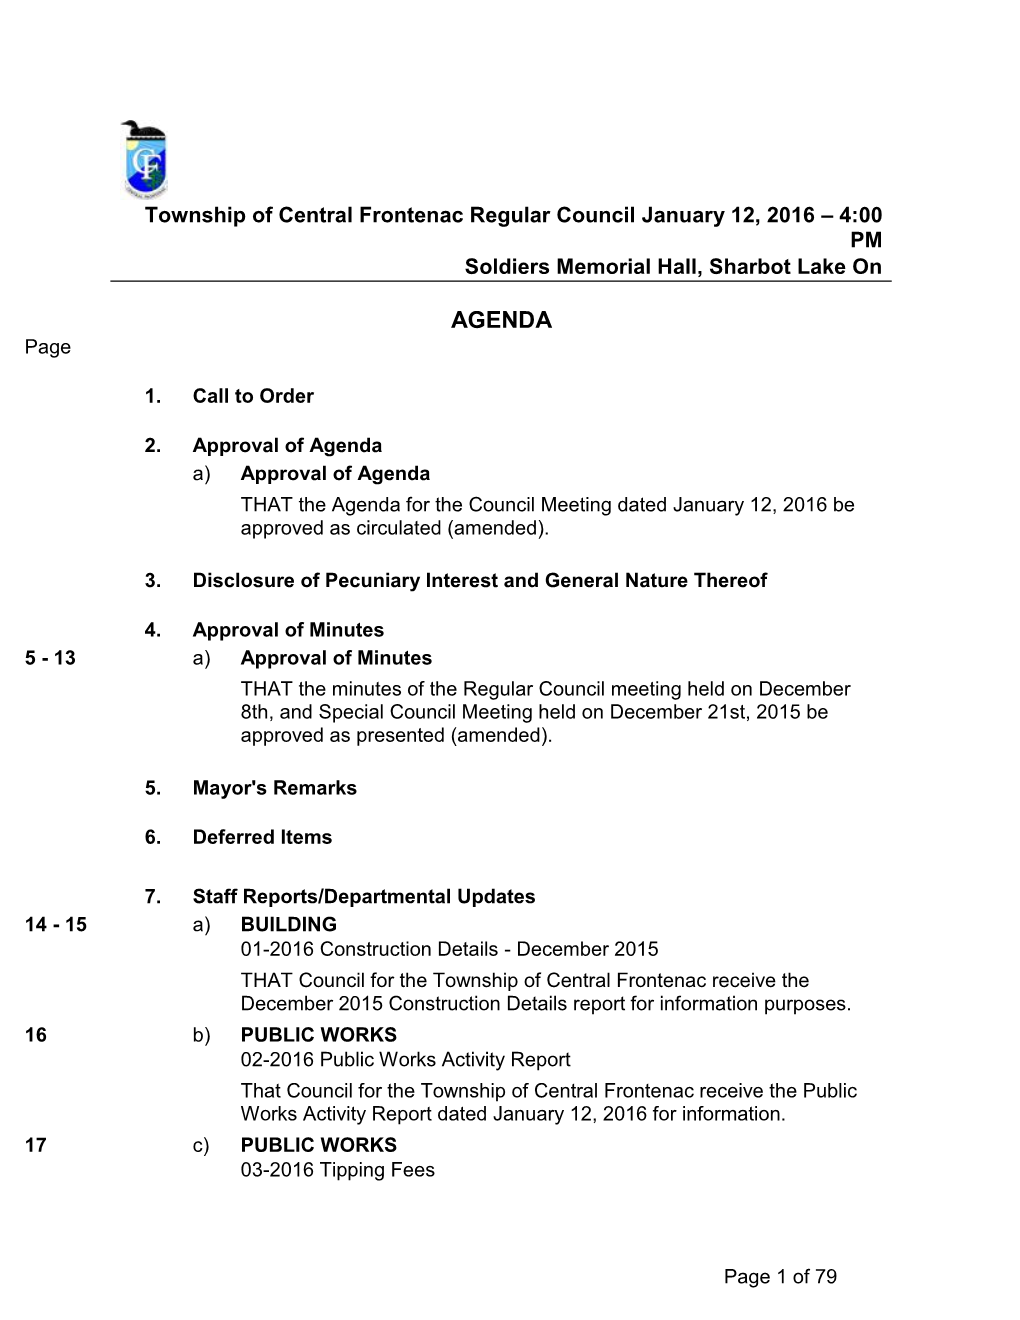 Township of Central Frontenac Regular Council January 12, 2016 – 4:00 PM Soldiers Memorial Hall, Sharbot Lake On